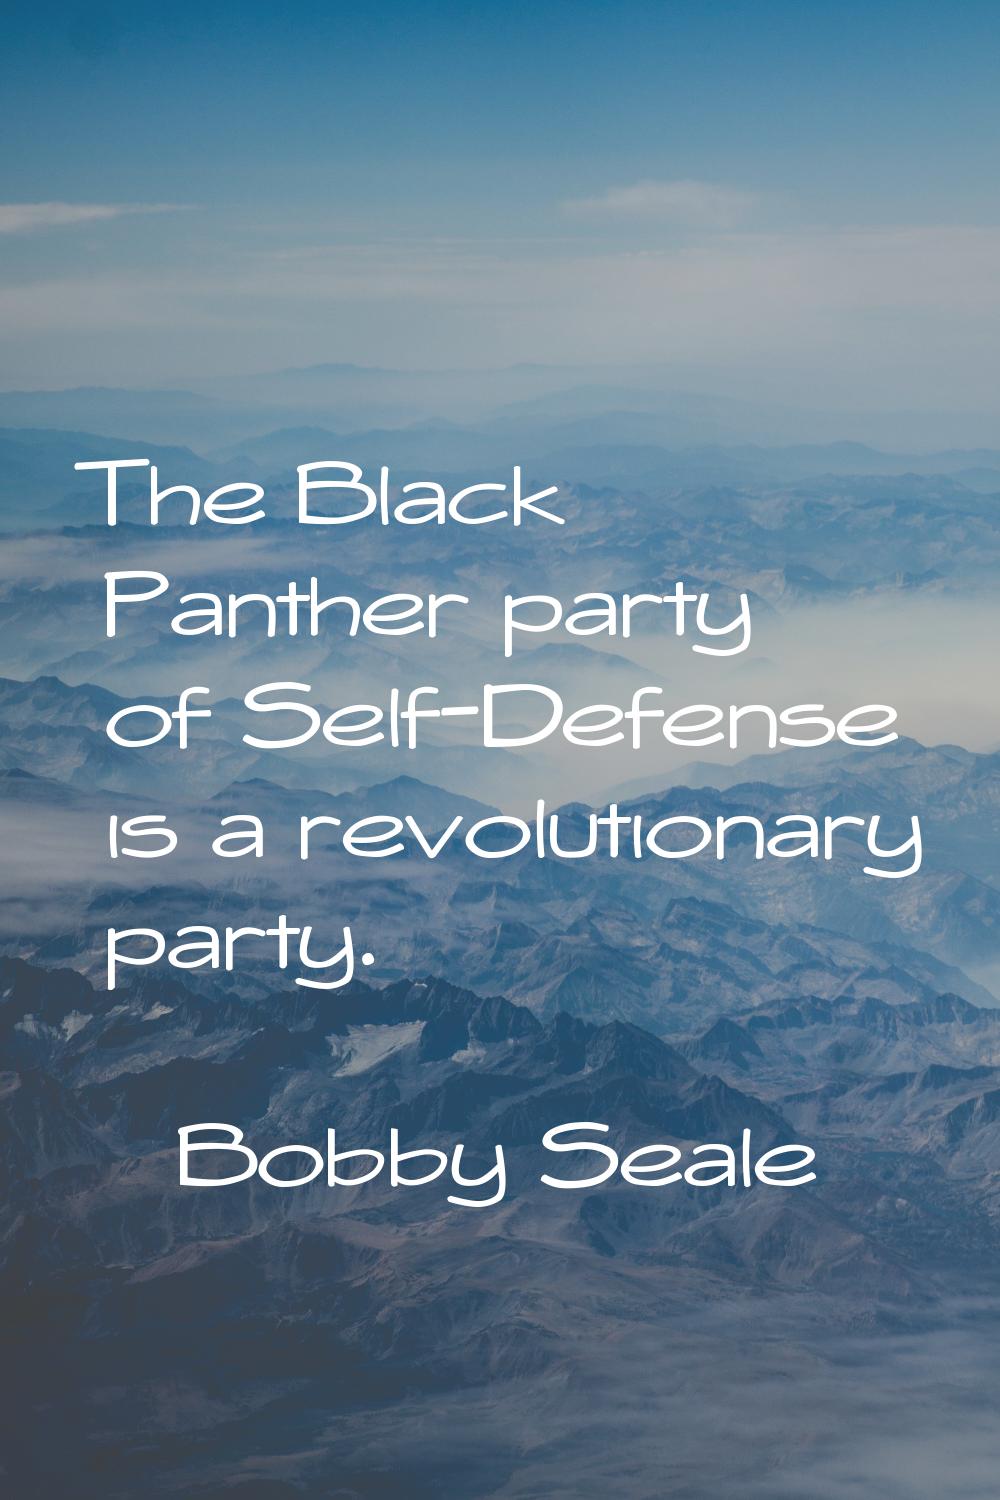 The Black Panther party of Self-Defense is a revolutionary party.